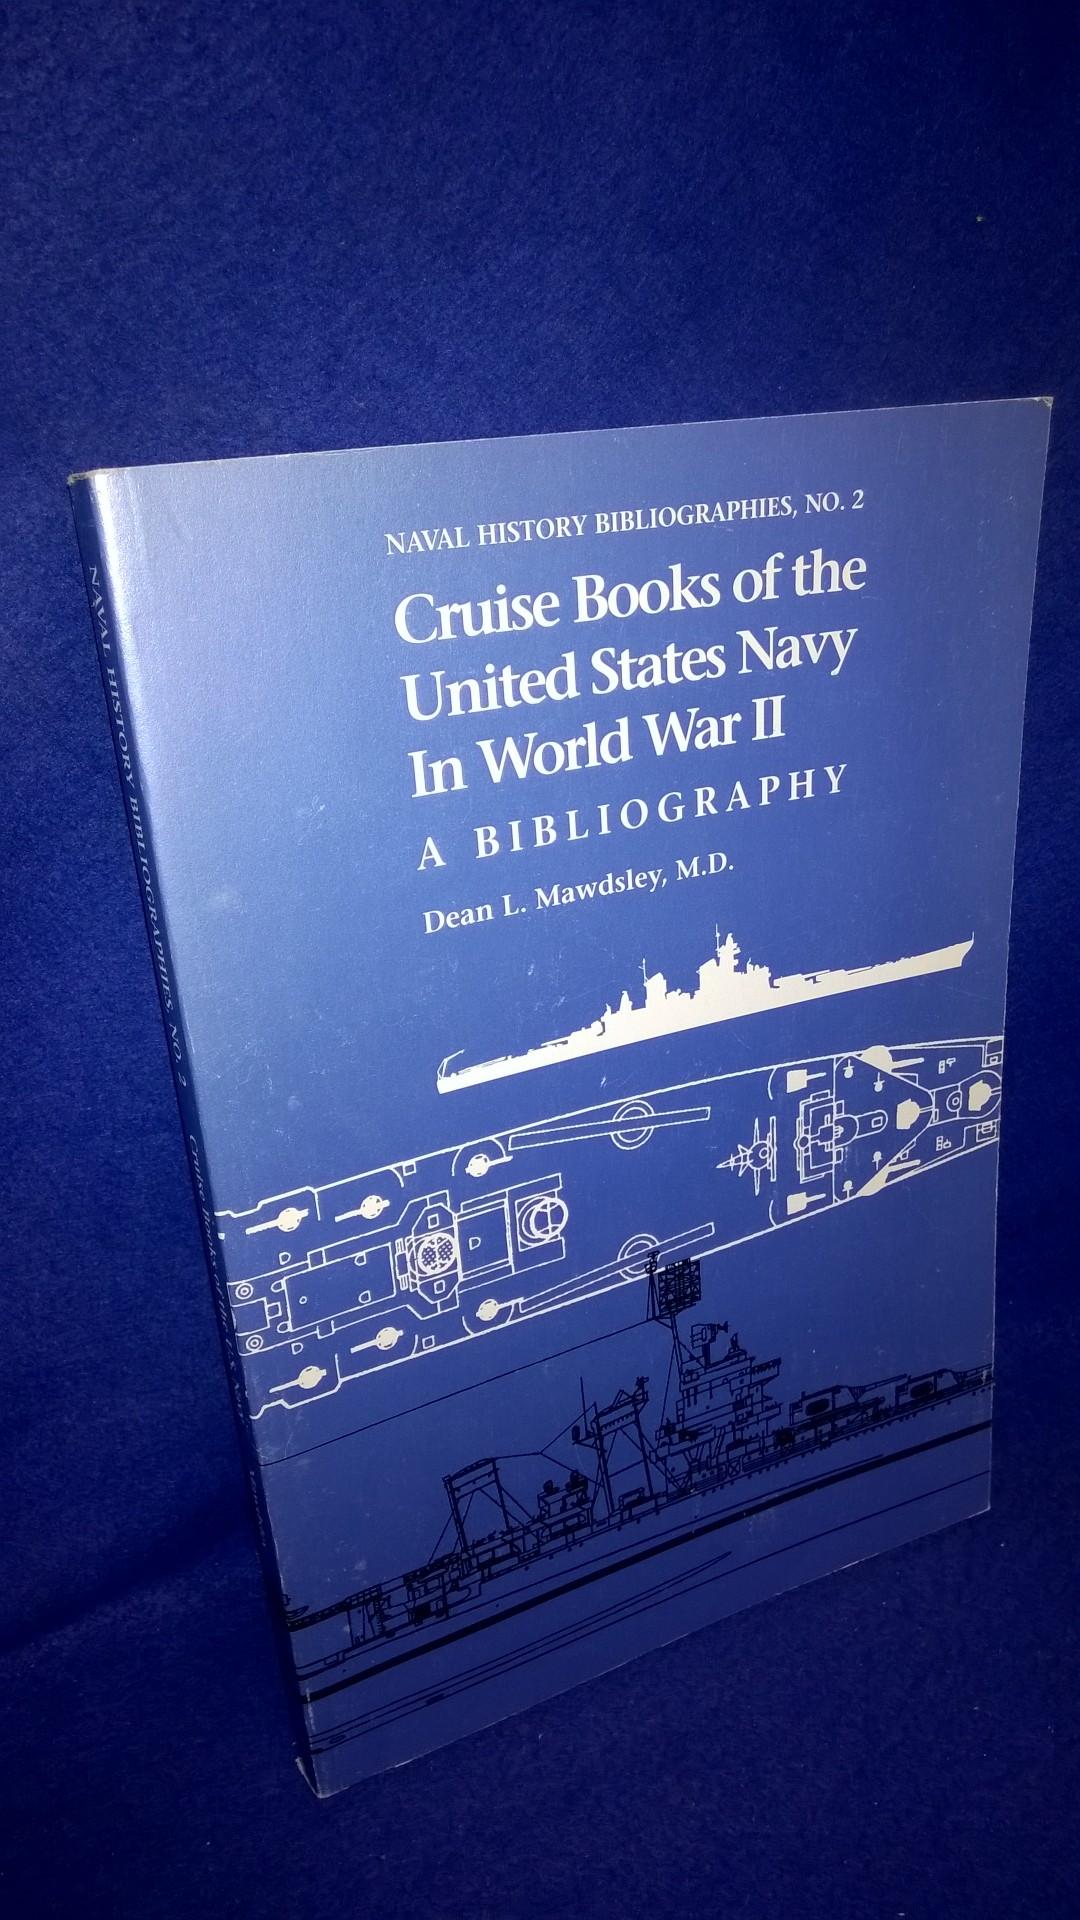 Cruise Books of the United States Navy in World War II: A Bibliography.